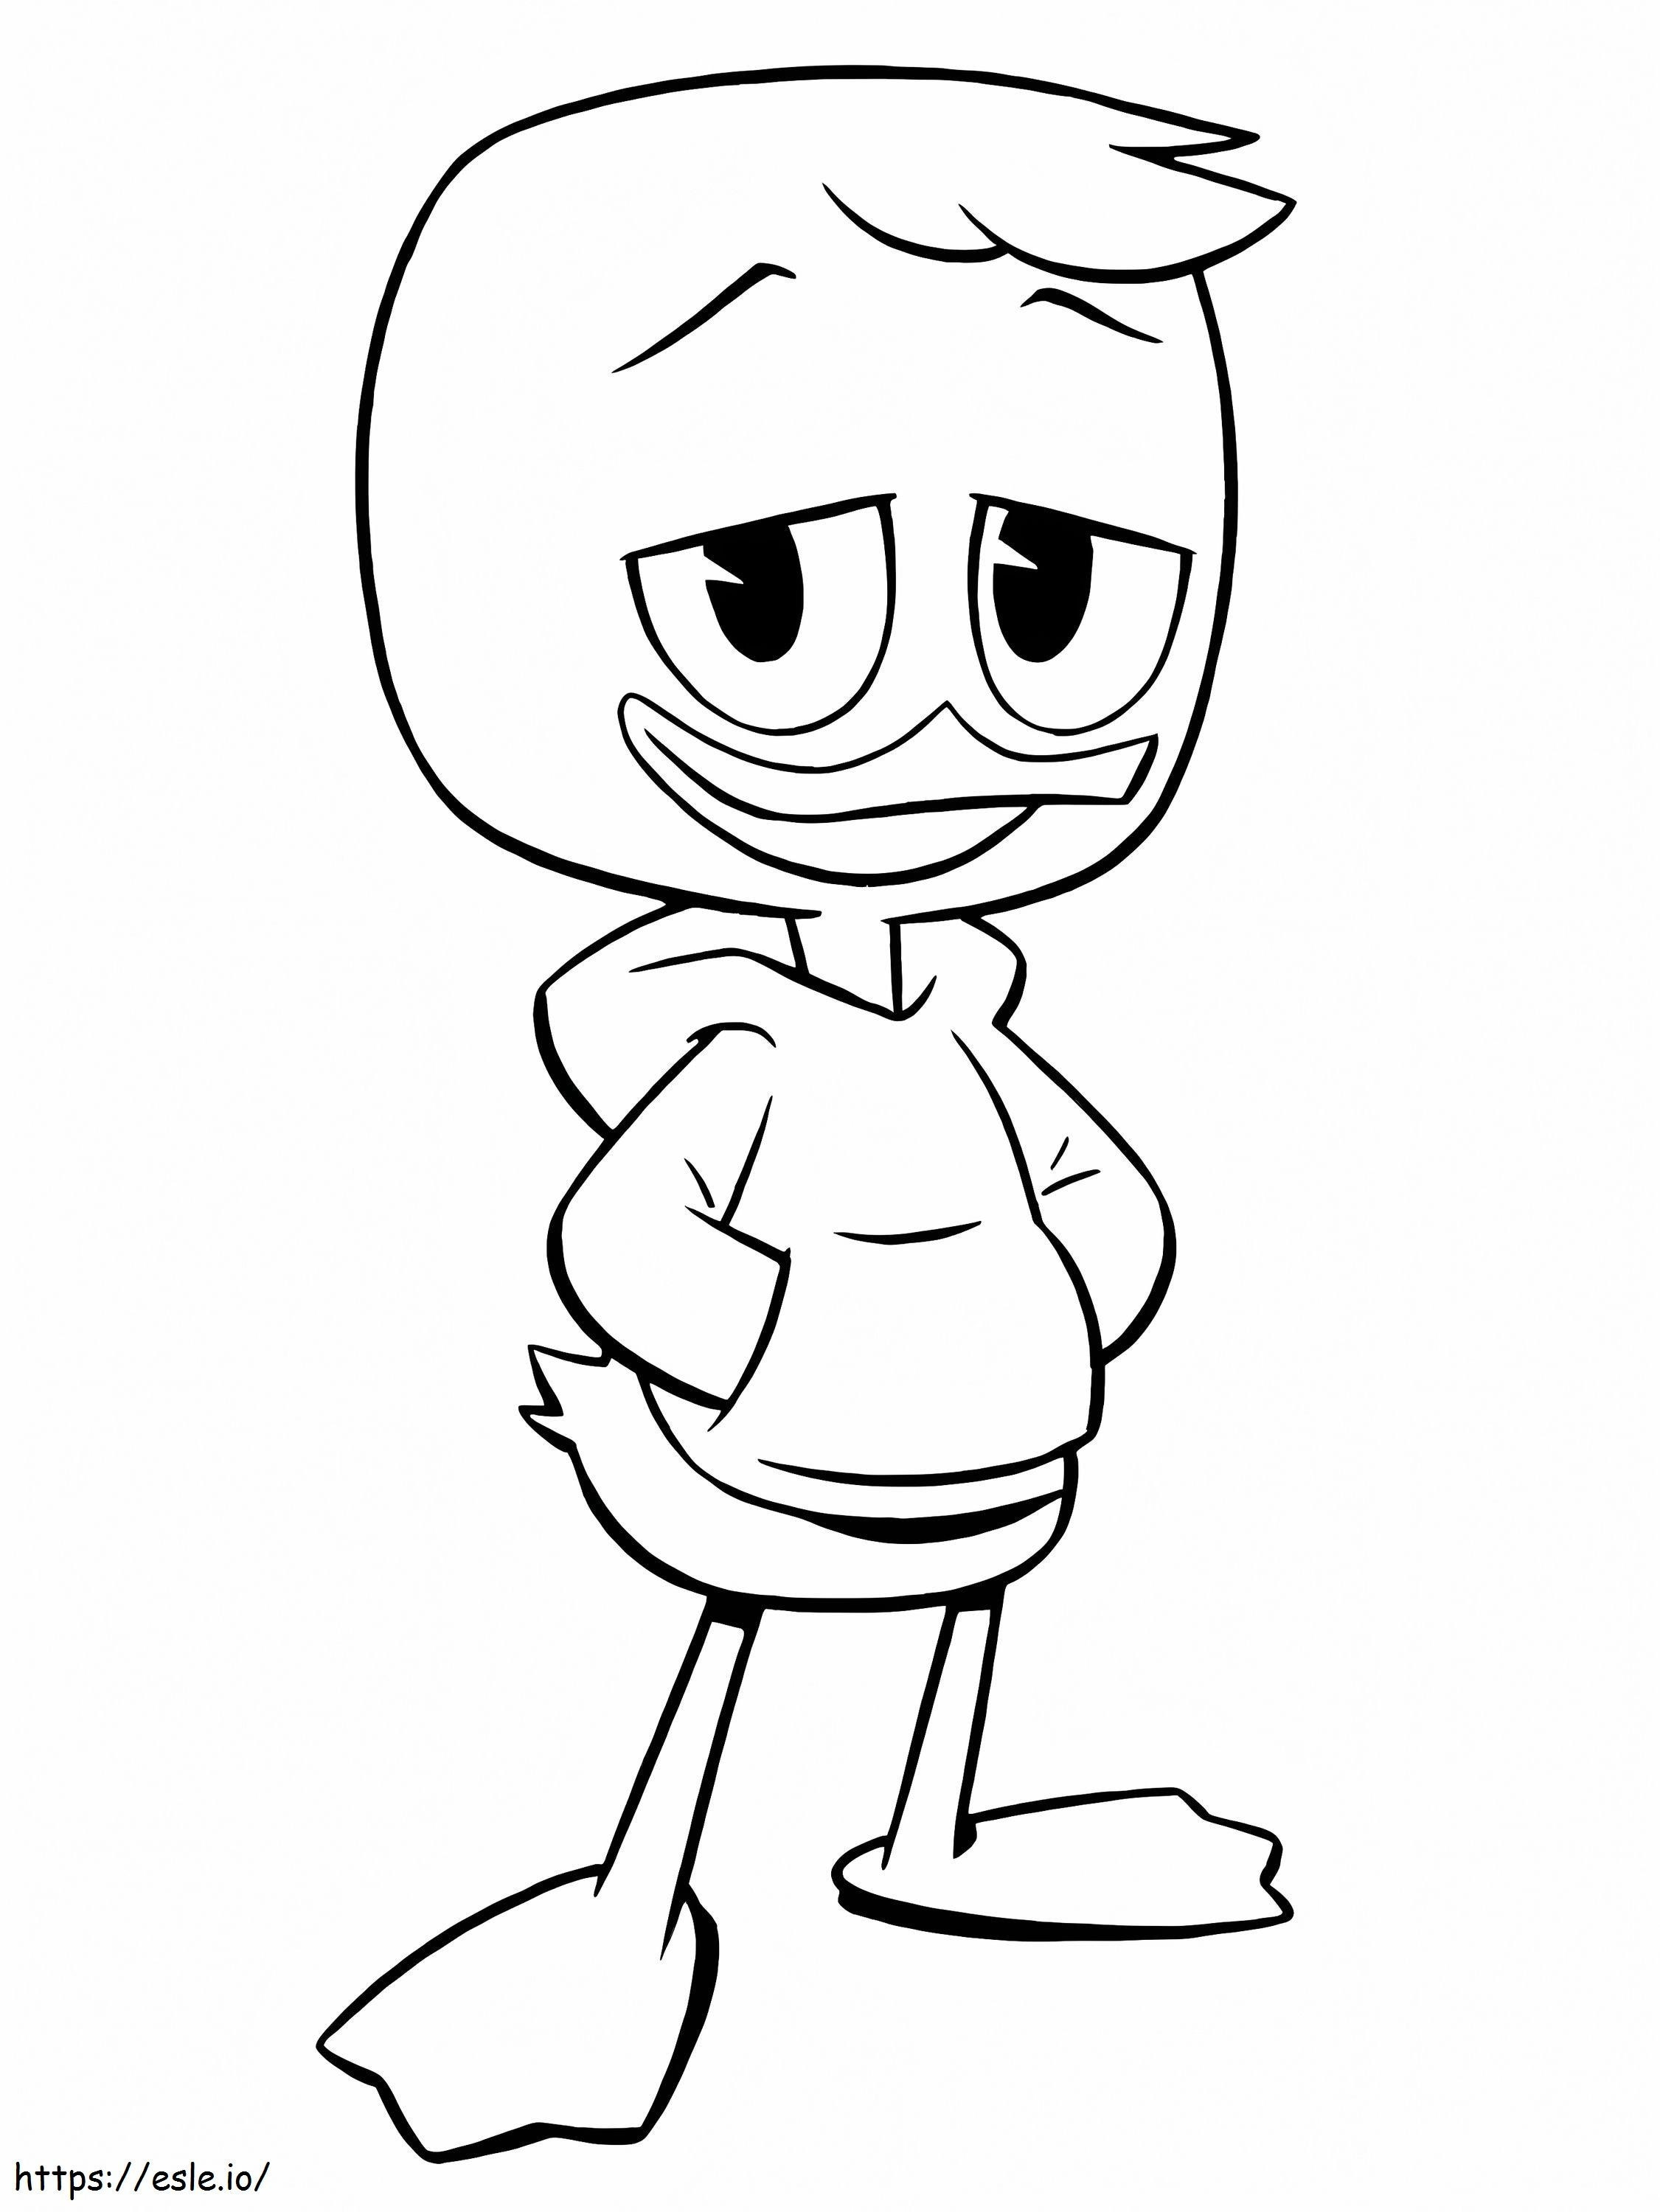 Louie Duck The Ducktales coloring page